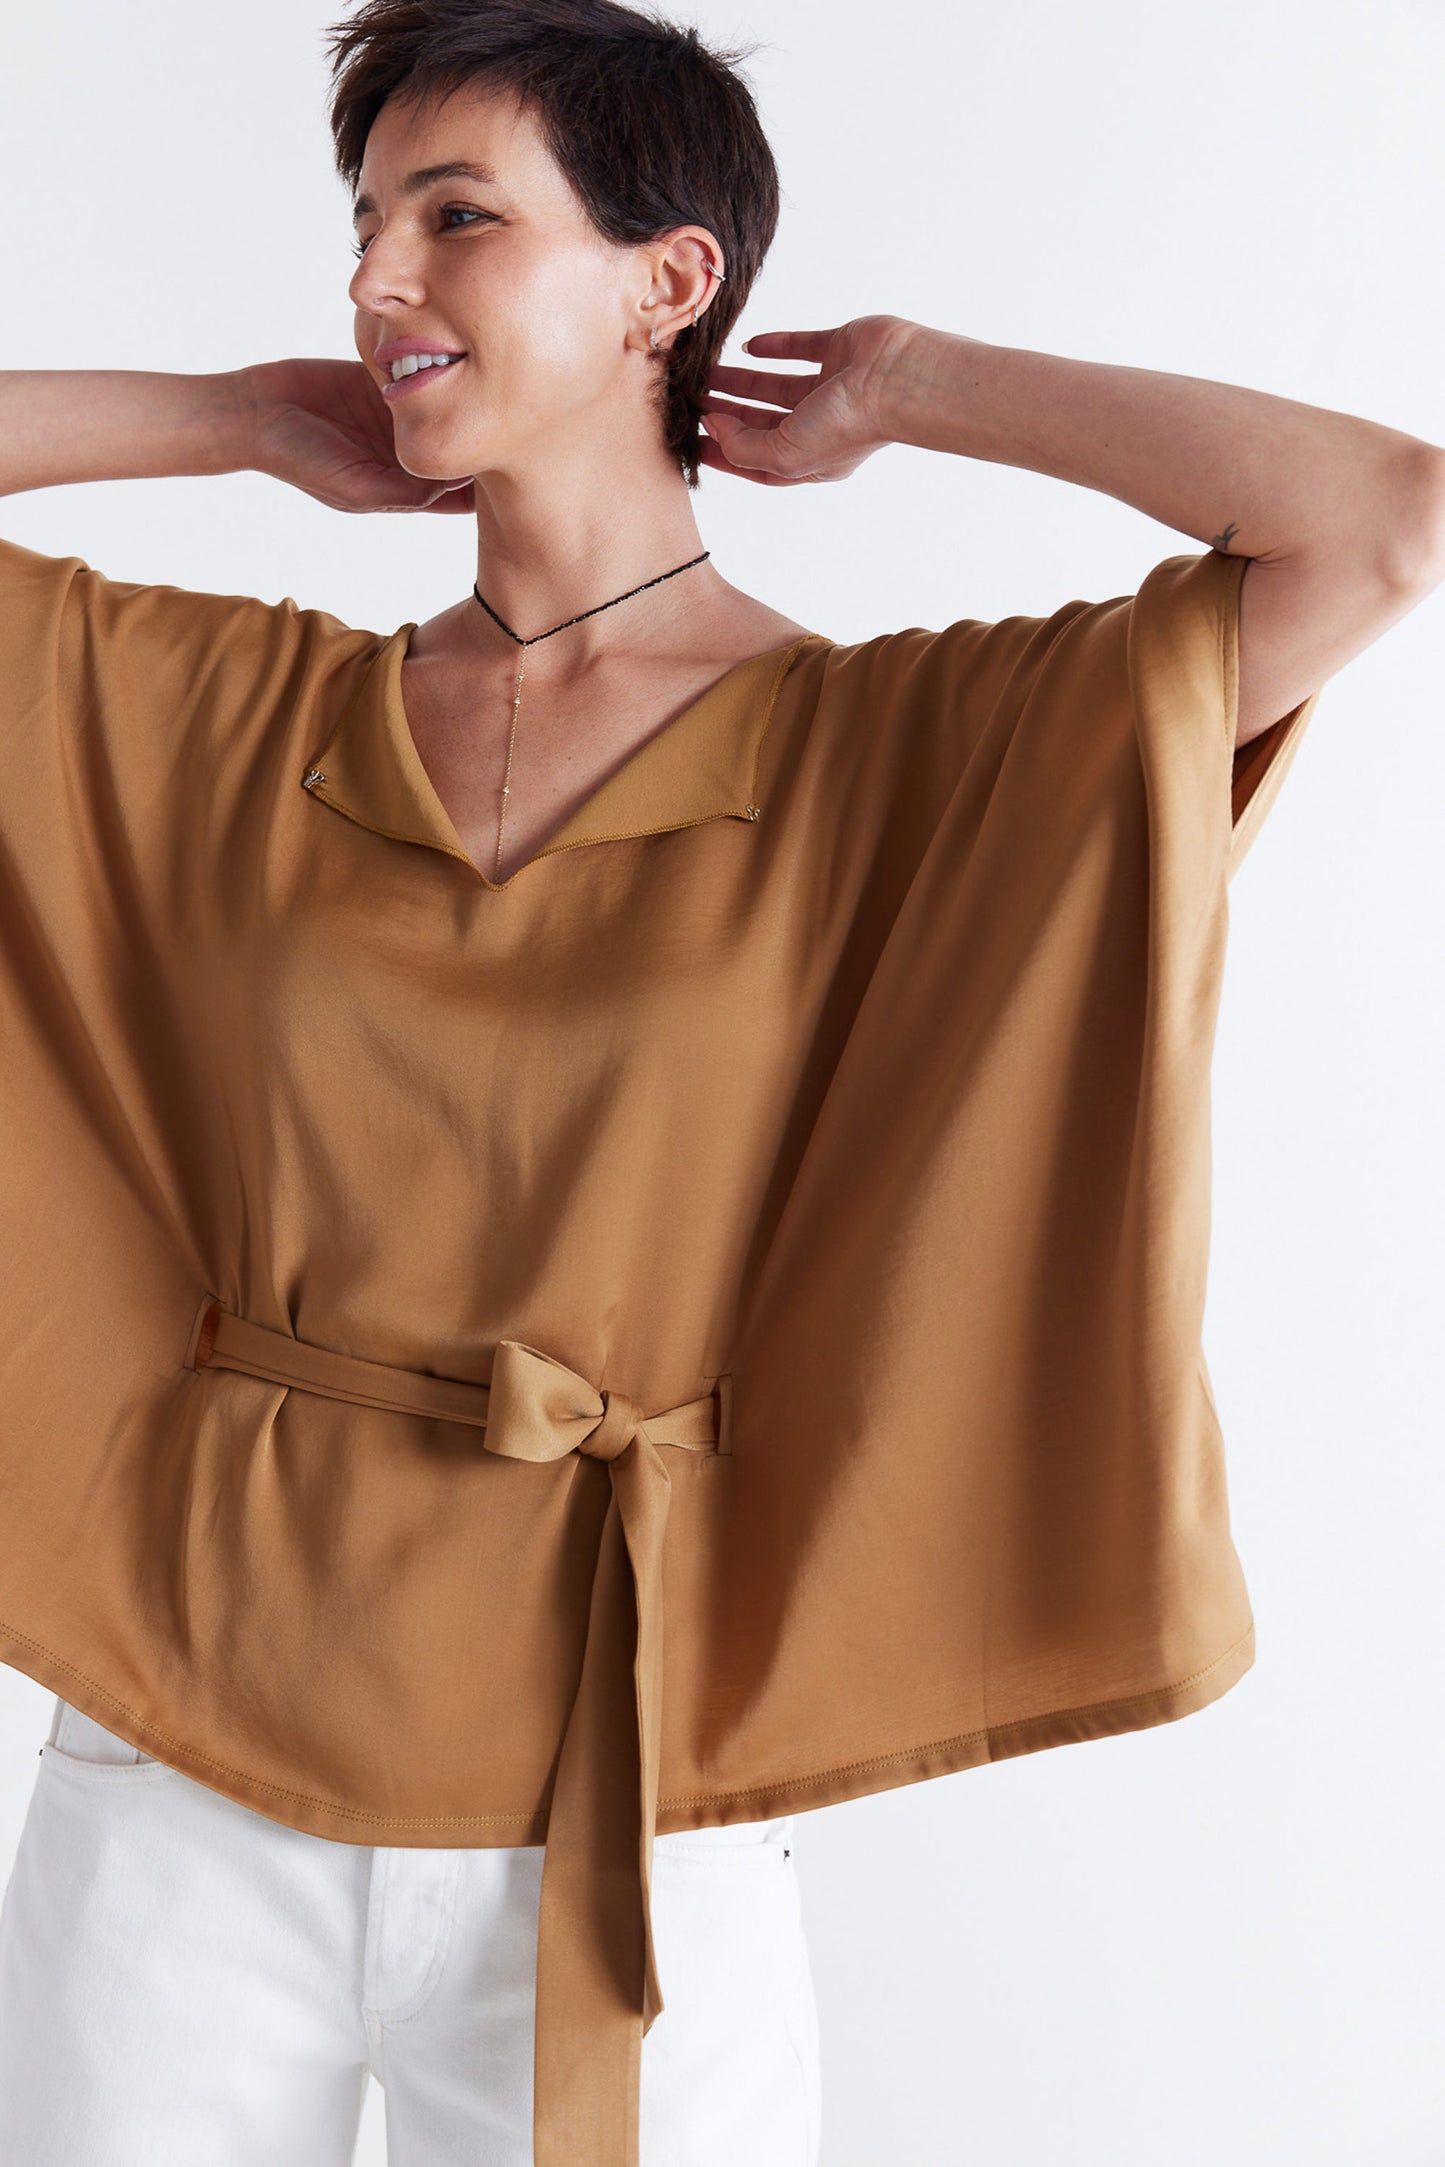 The Slinky Surprising Blouse